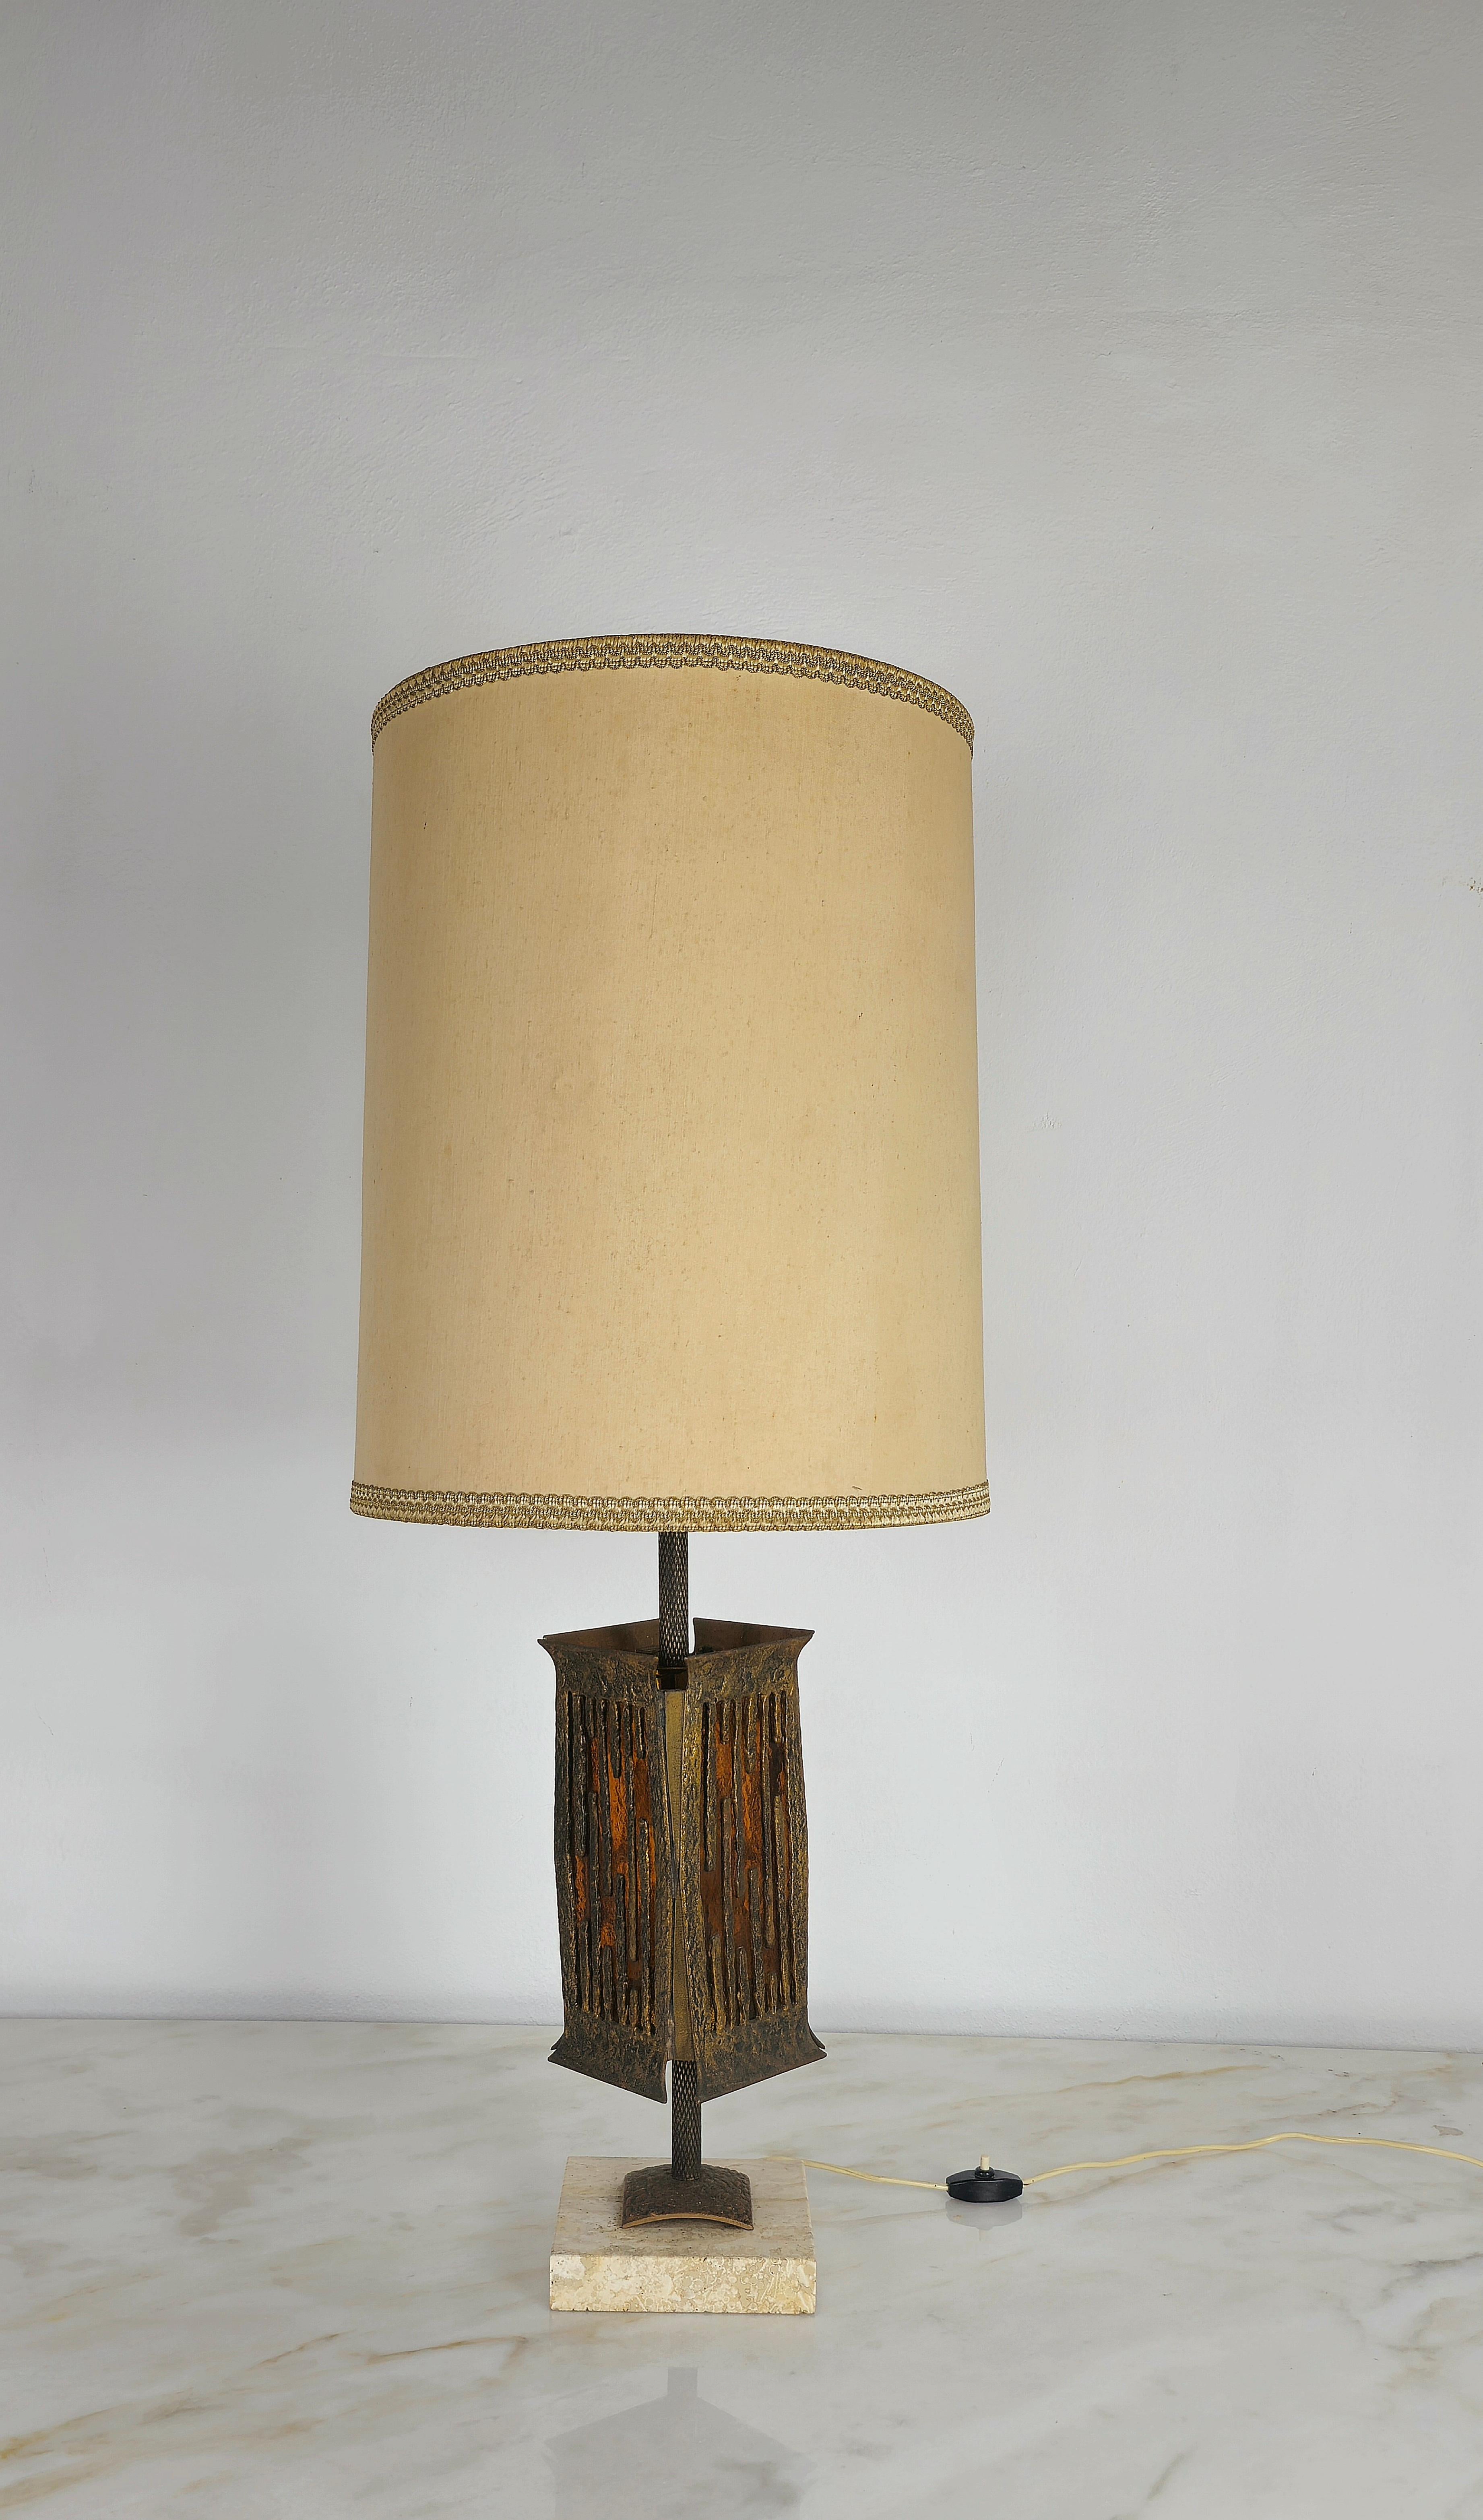 Brutalist table lamp by Albano Poli for Poliarte made in Italy in the 70s.
The lamp has a bronze structure with 2 intermittent lights, the first which illuminates the cylindrical fabric lampshade, and the second illuminates a caramel colored